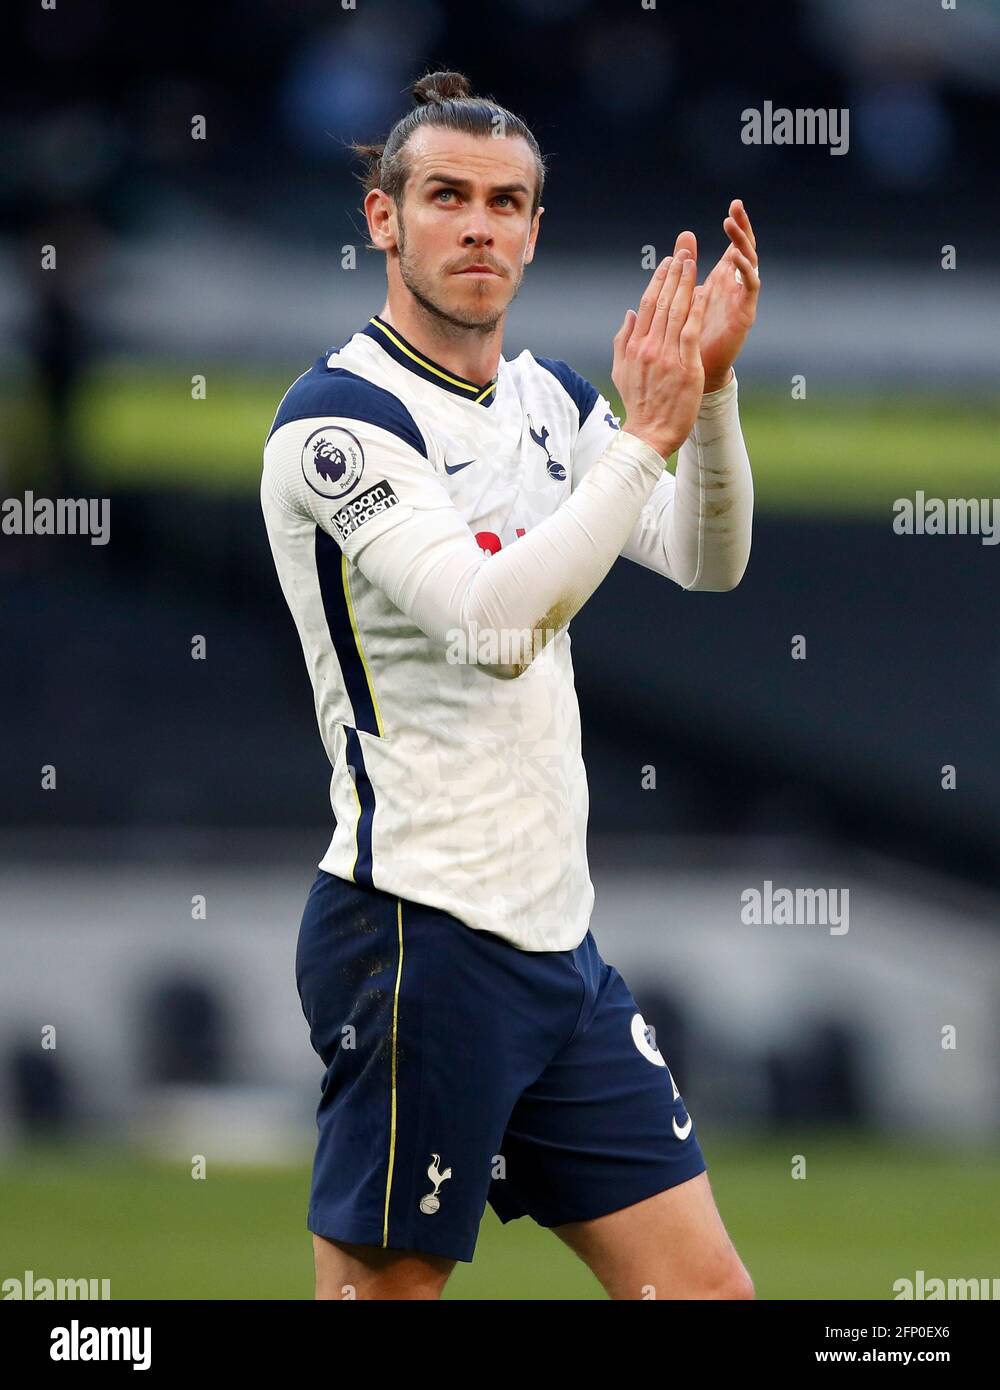 Tottenham Hotspur's Gareth Bale reacts after the final whistle during the Premier League match at the Tottenham Hotspur Stadium, London. Picture date: Wednesday May 19, 2021. Stock Photo